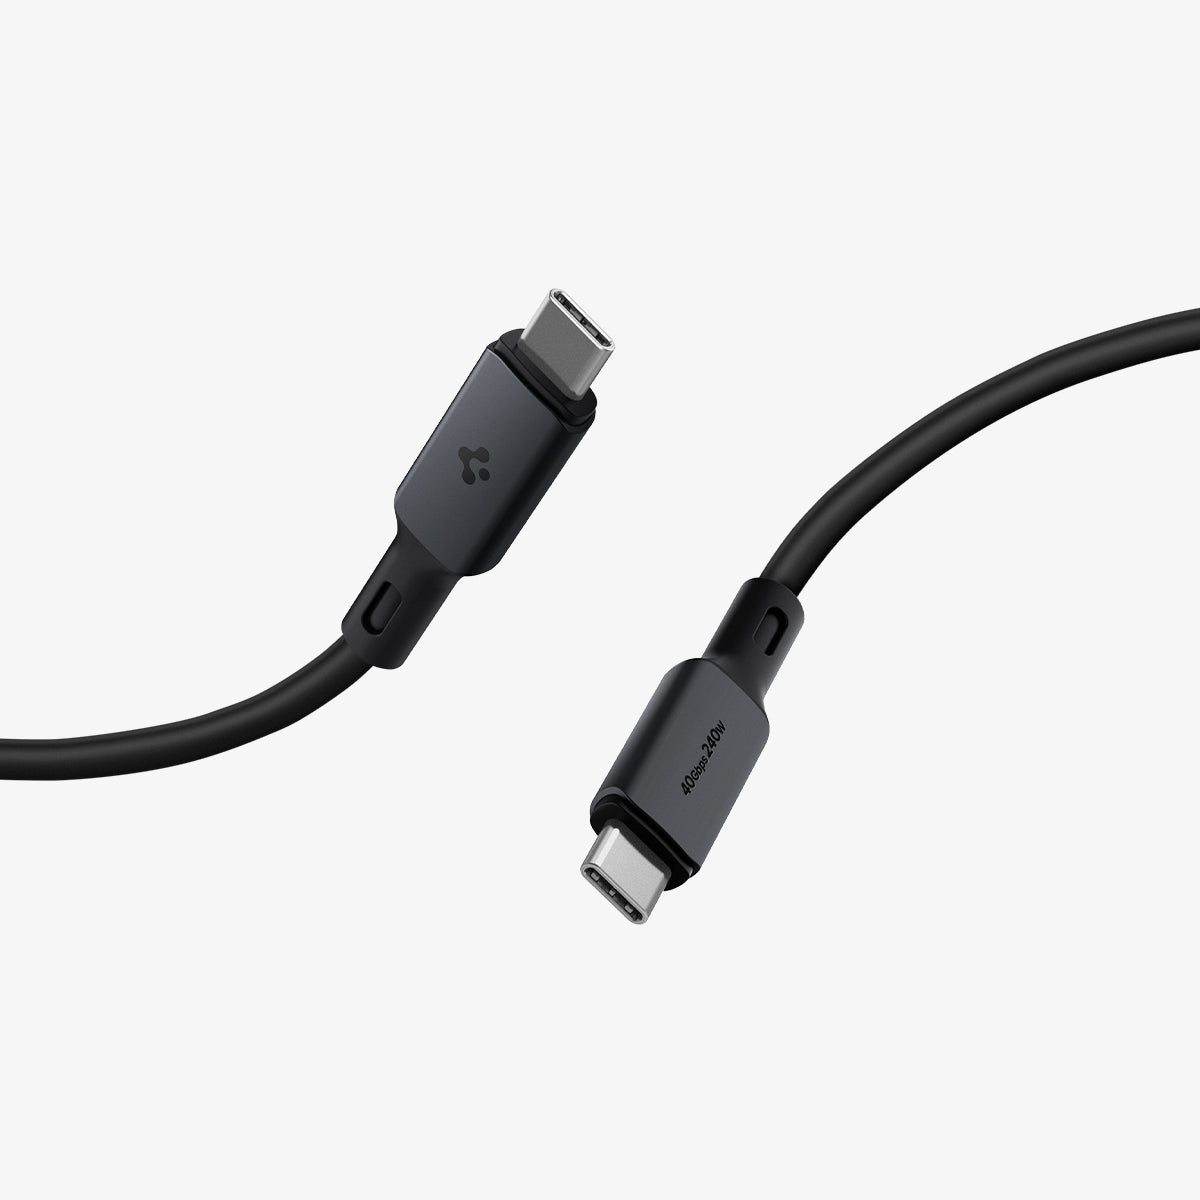 ACA06839 - ArcWire™ USB-C to USB-C Cable PB2202 in Black showing the 2 heads of a charger cable in 40Gbps/240W